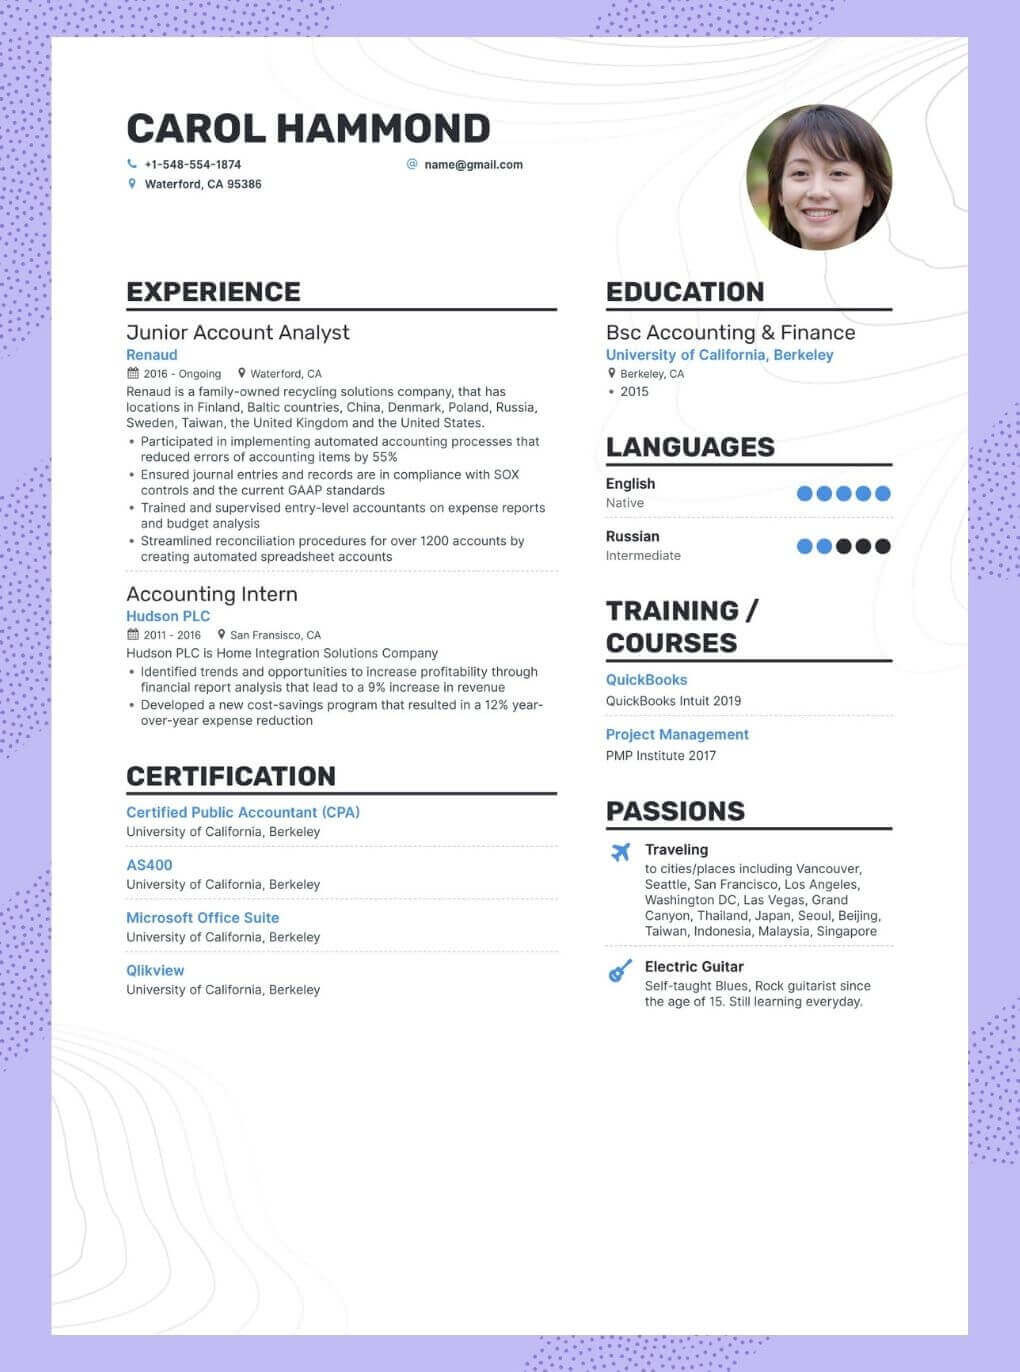 Sample Resume with Explanation for why You Re Seeking Regular Employment Resume Job Description: Samples & Tips to Help You Enhance Your …